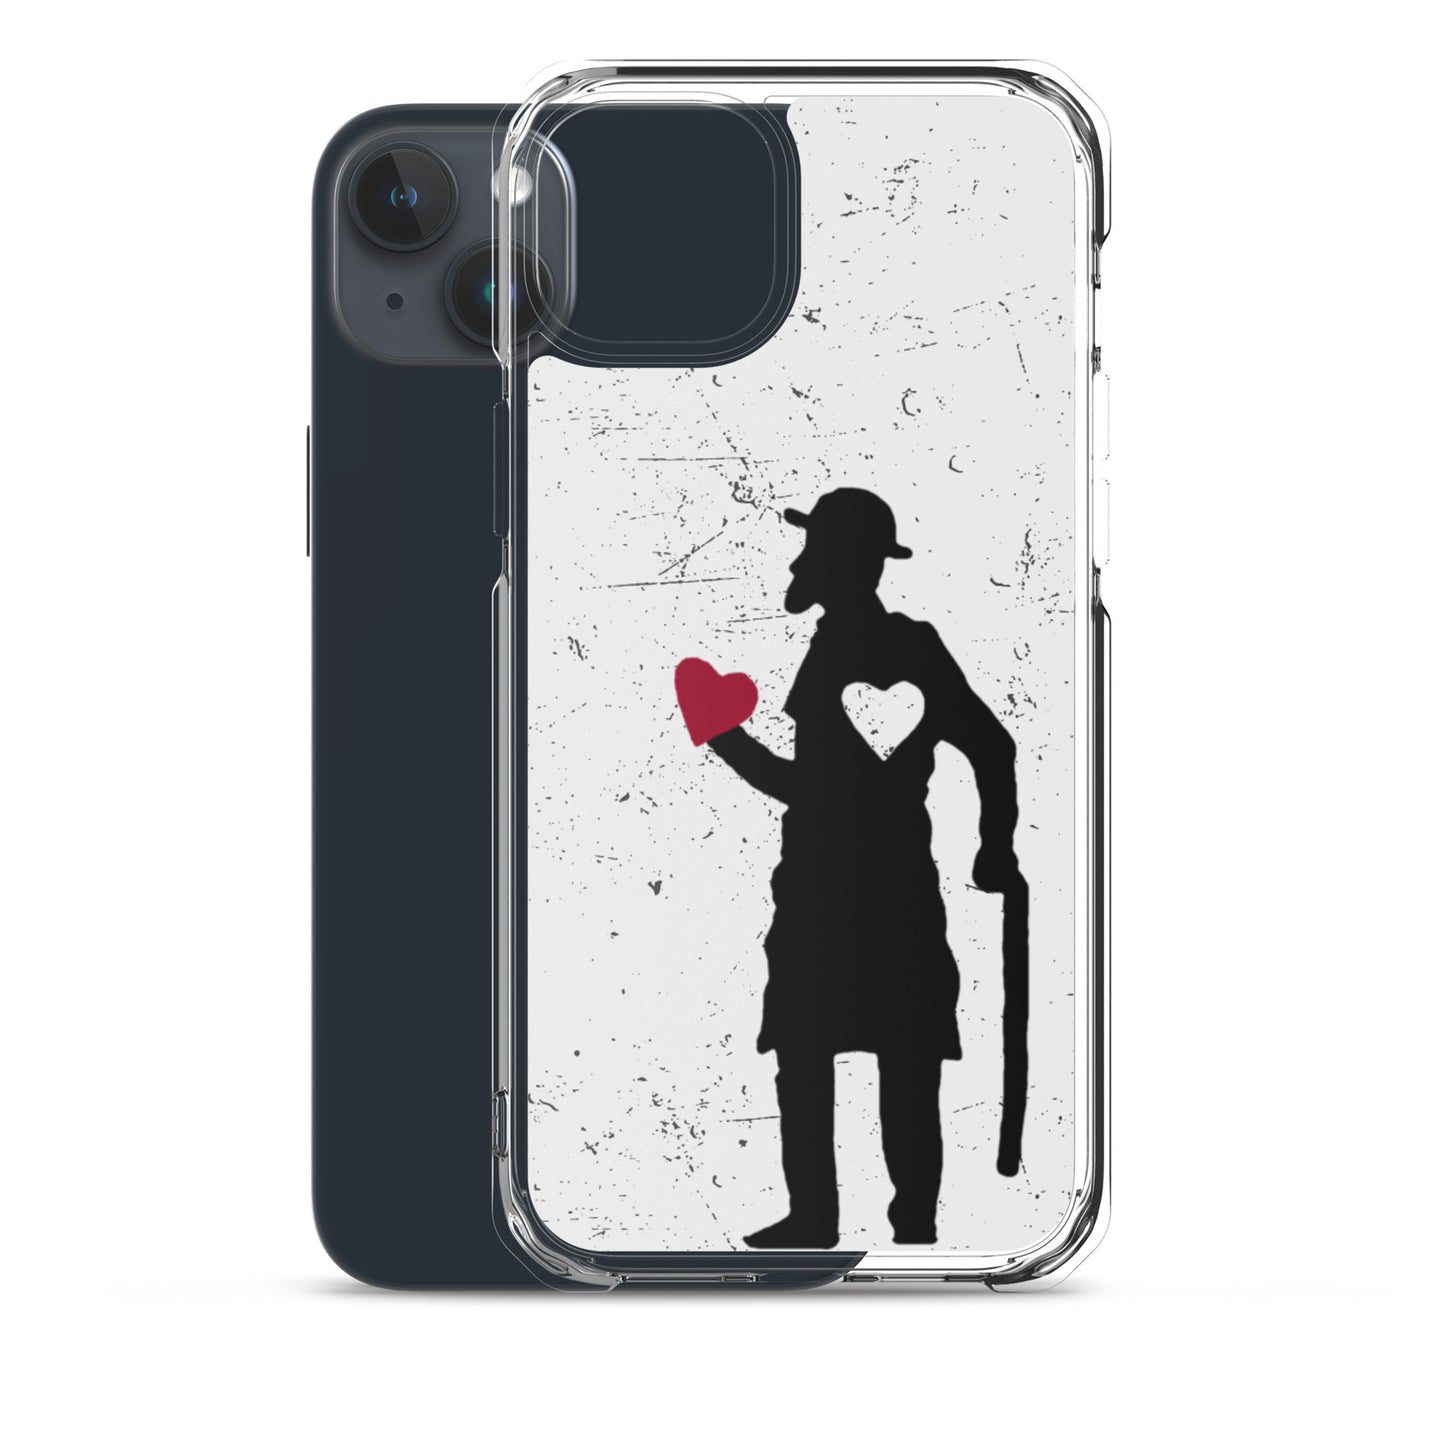 Take My Heart (iPhone Case)